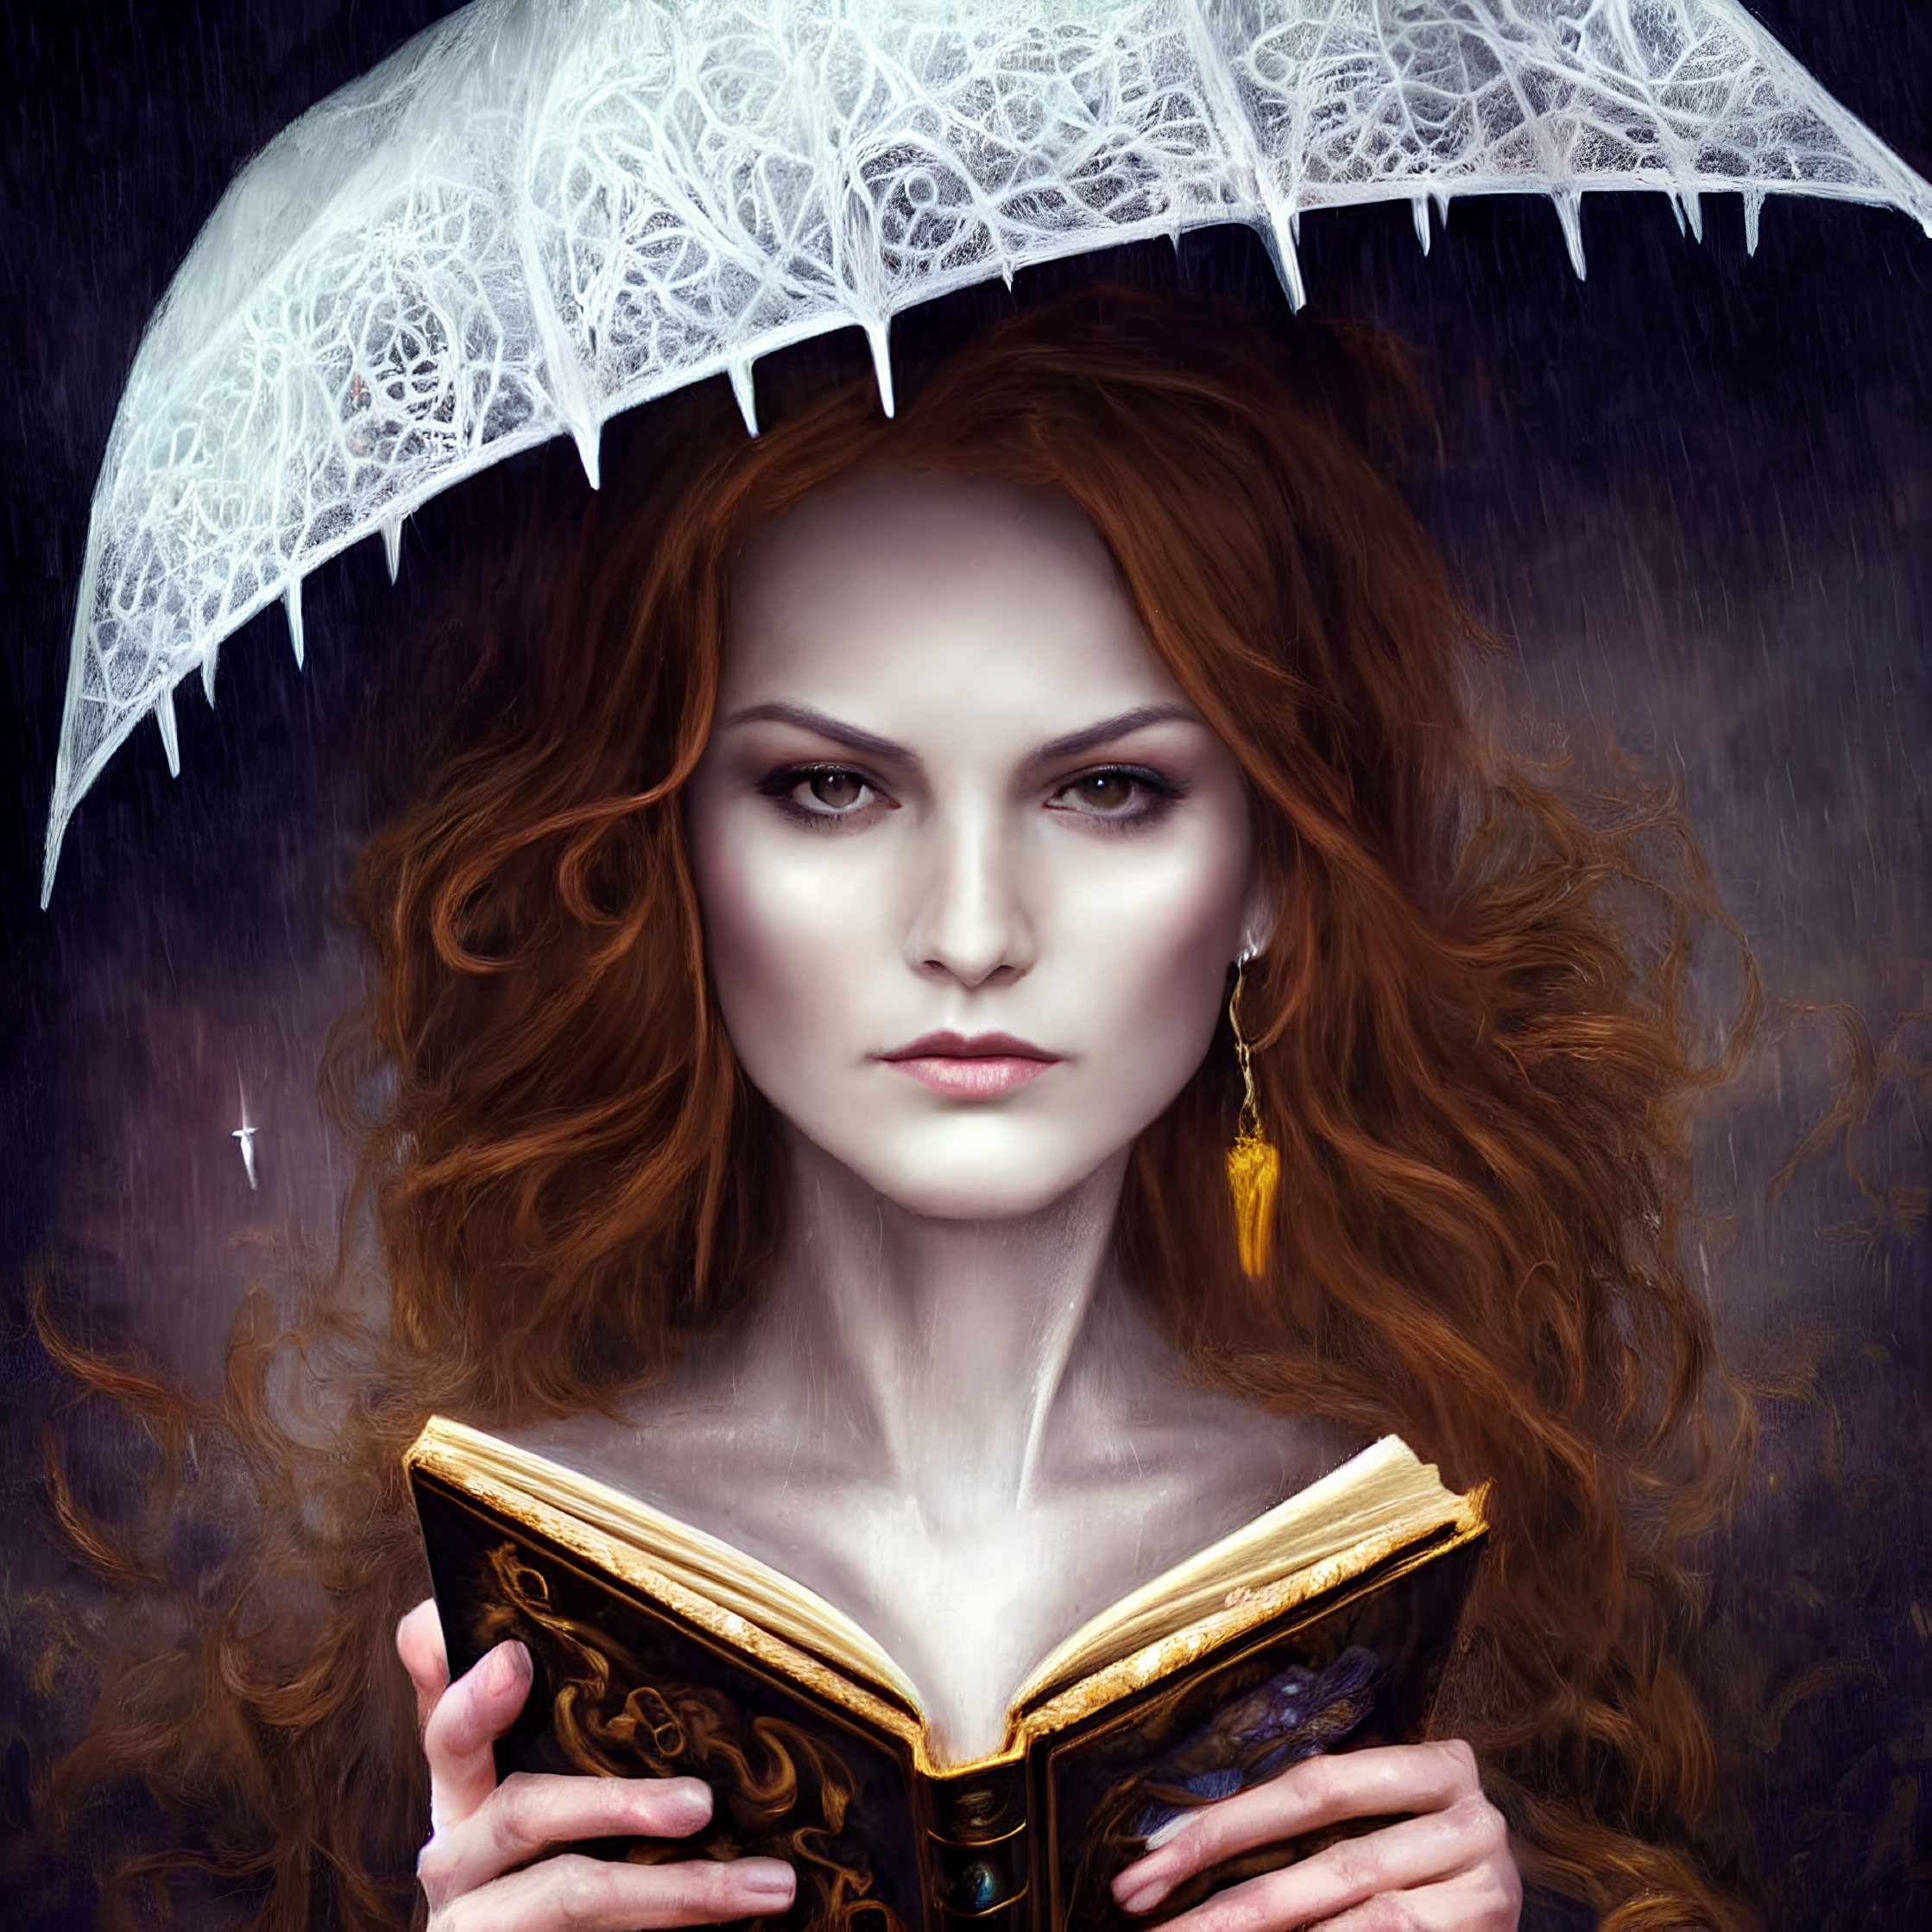 Red-haired woman with book and lace umbrella against dark background